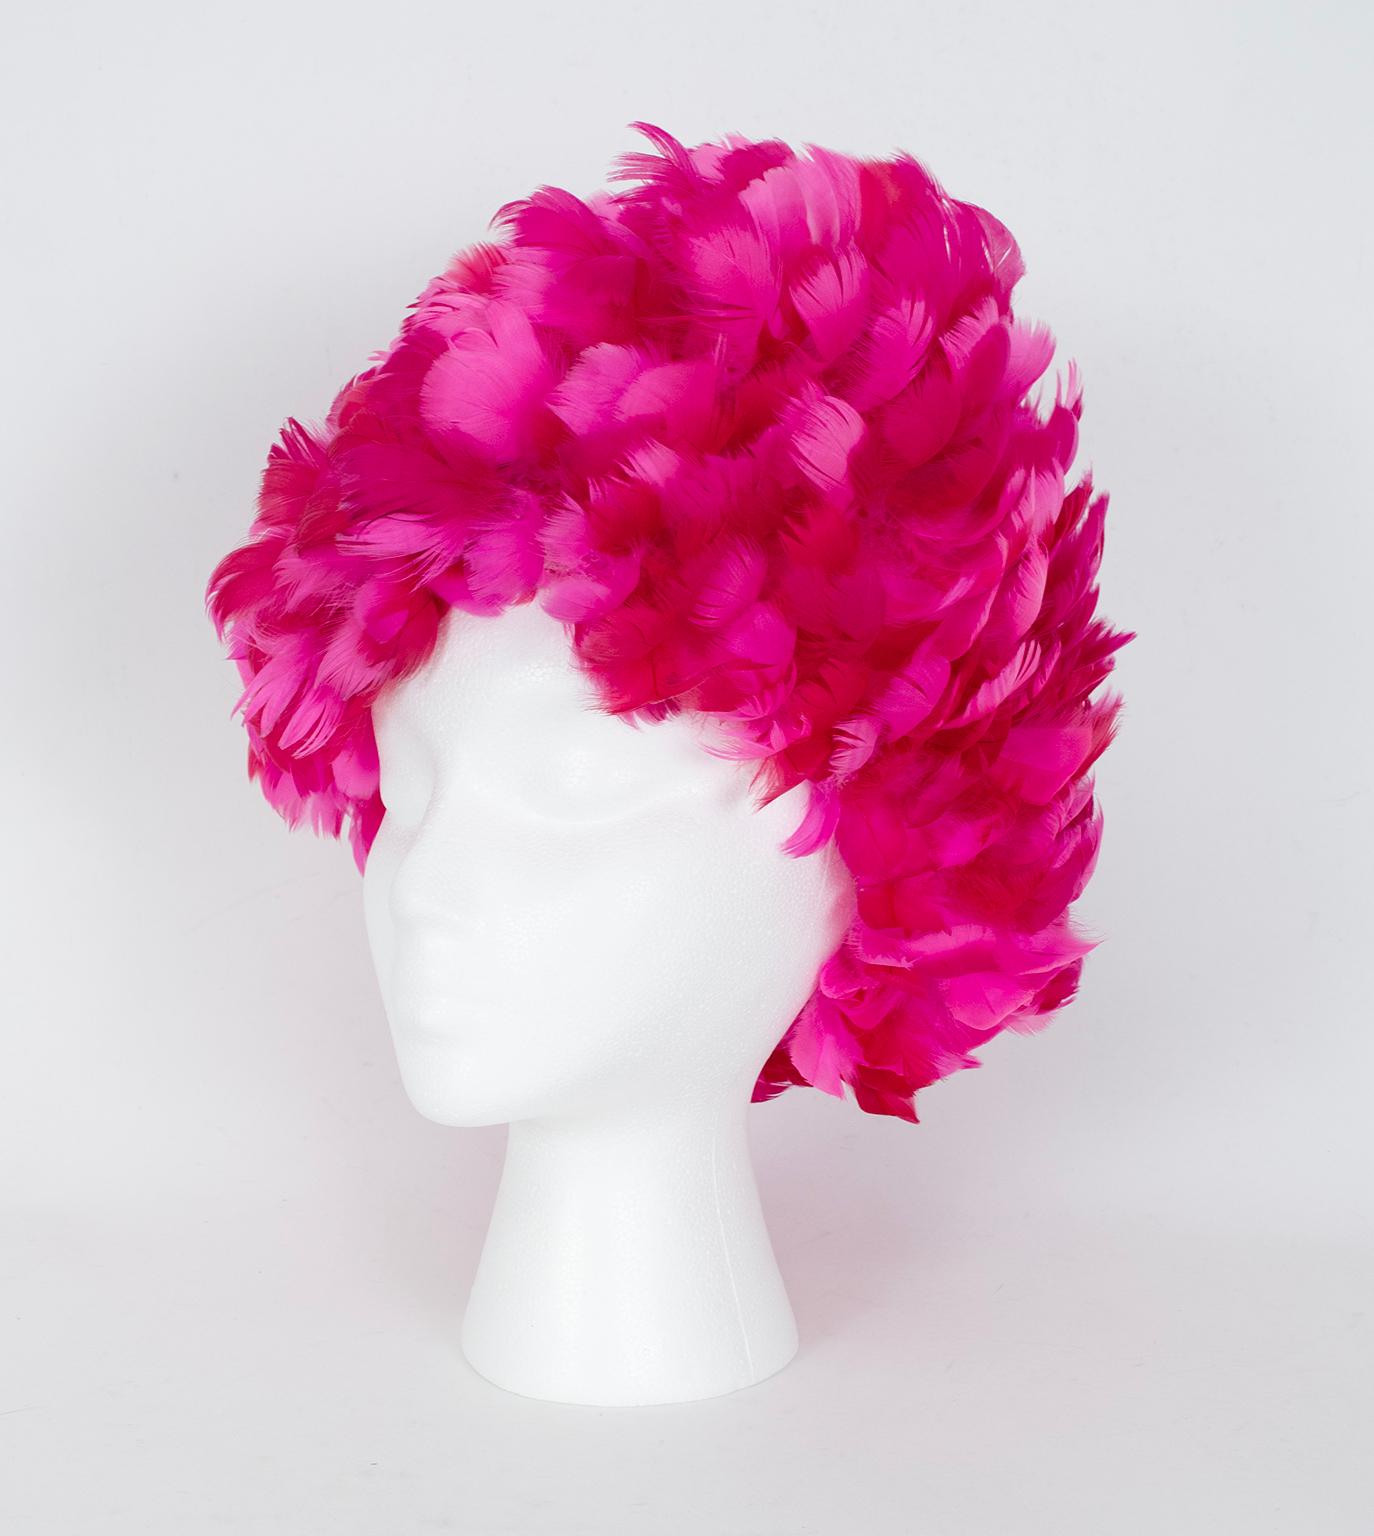 When flamboyance is required, look no further than a turban of hot pink feathers.  Constructed like an elastic shower cap, when stuffed it can reach a height of nearly a foot.  Who knows what you’ll walk out with beneath it?

Elastic hairnet-style